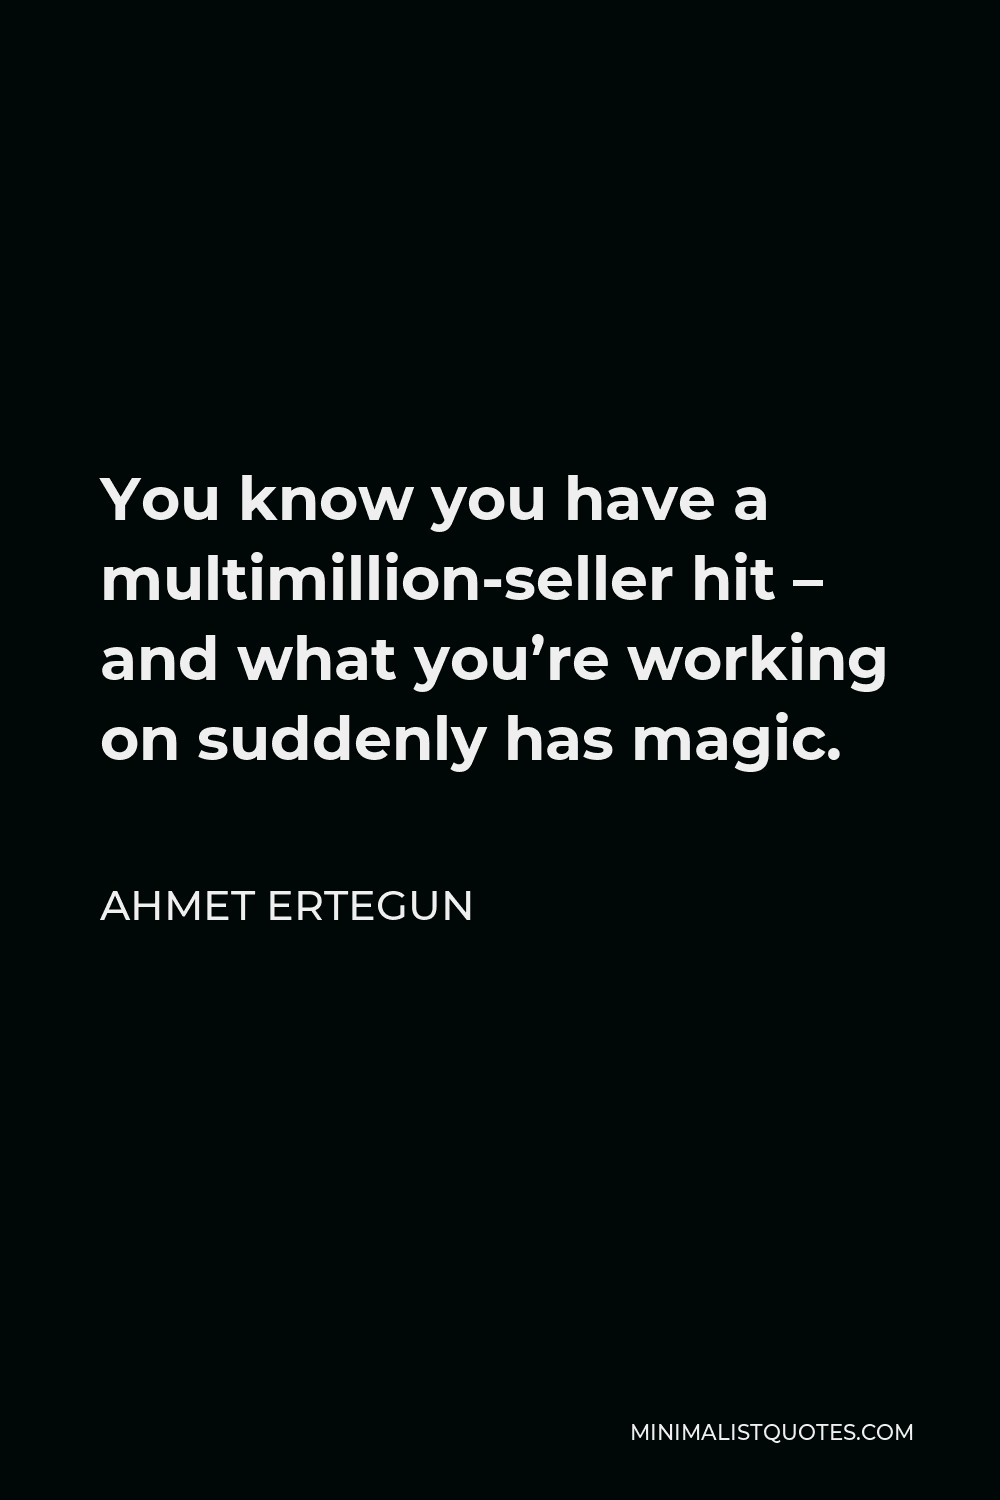 Ahmet Ertegun Quote - You know you have a multimillion-seller hit – and what you’re working on suddenly has magic.